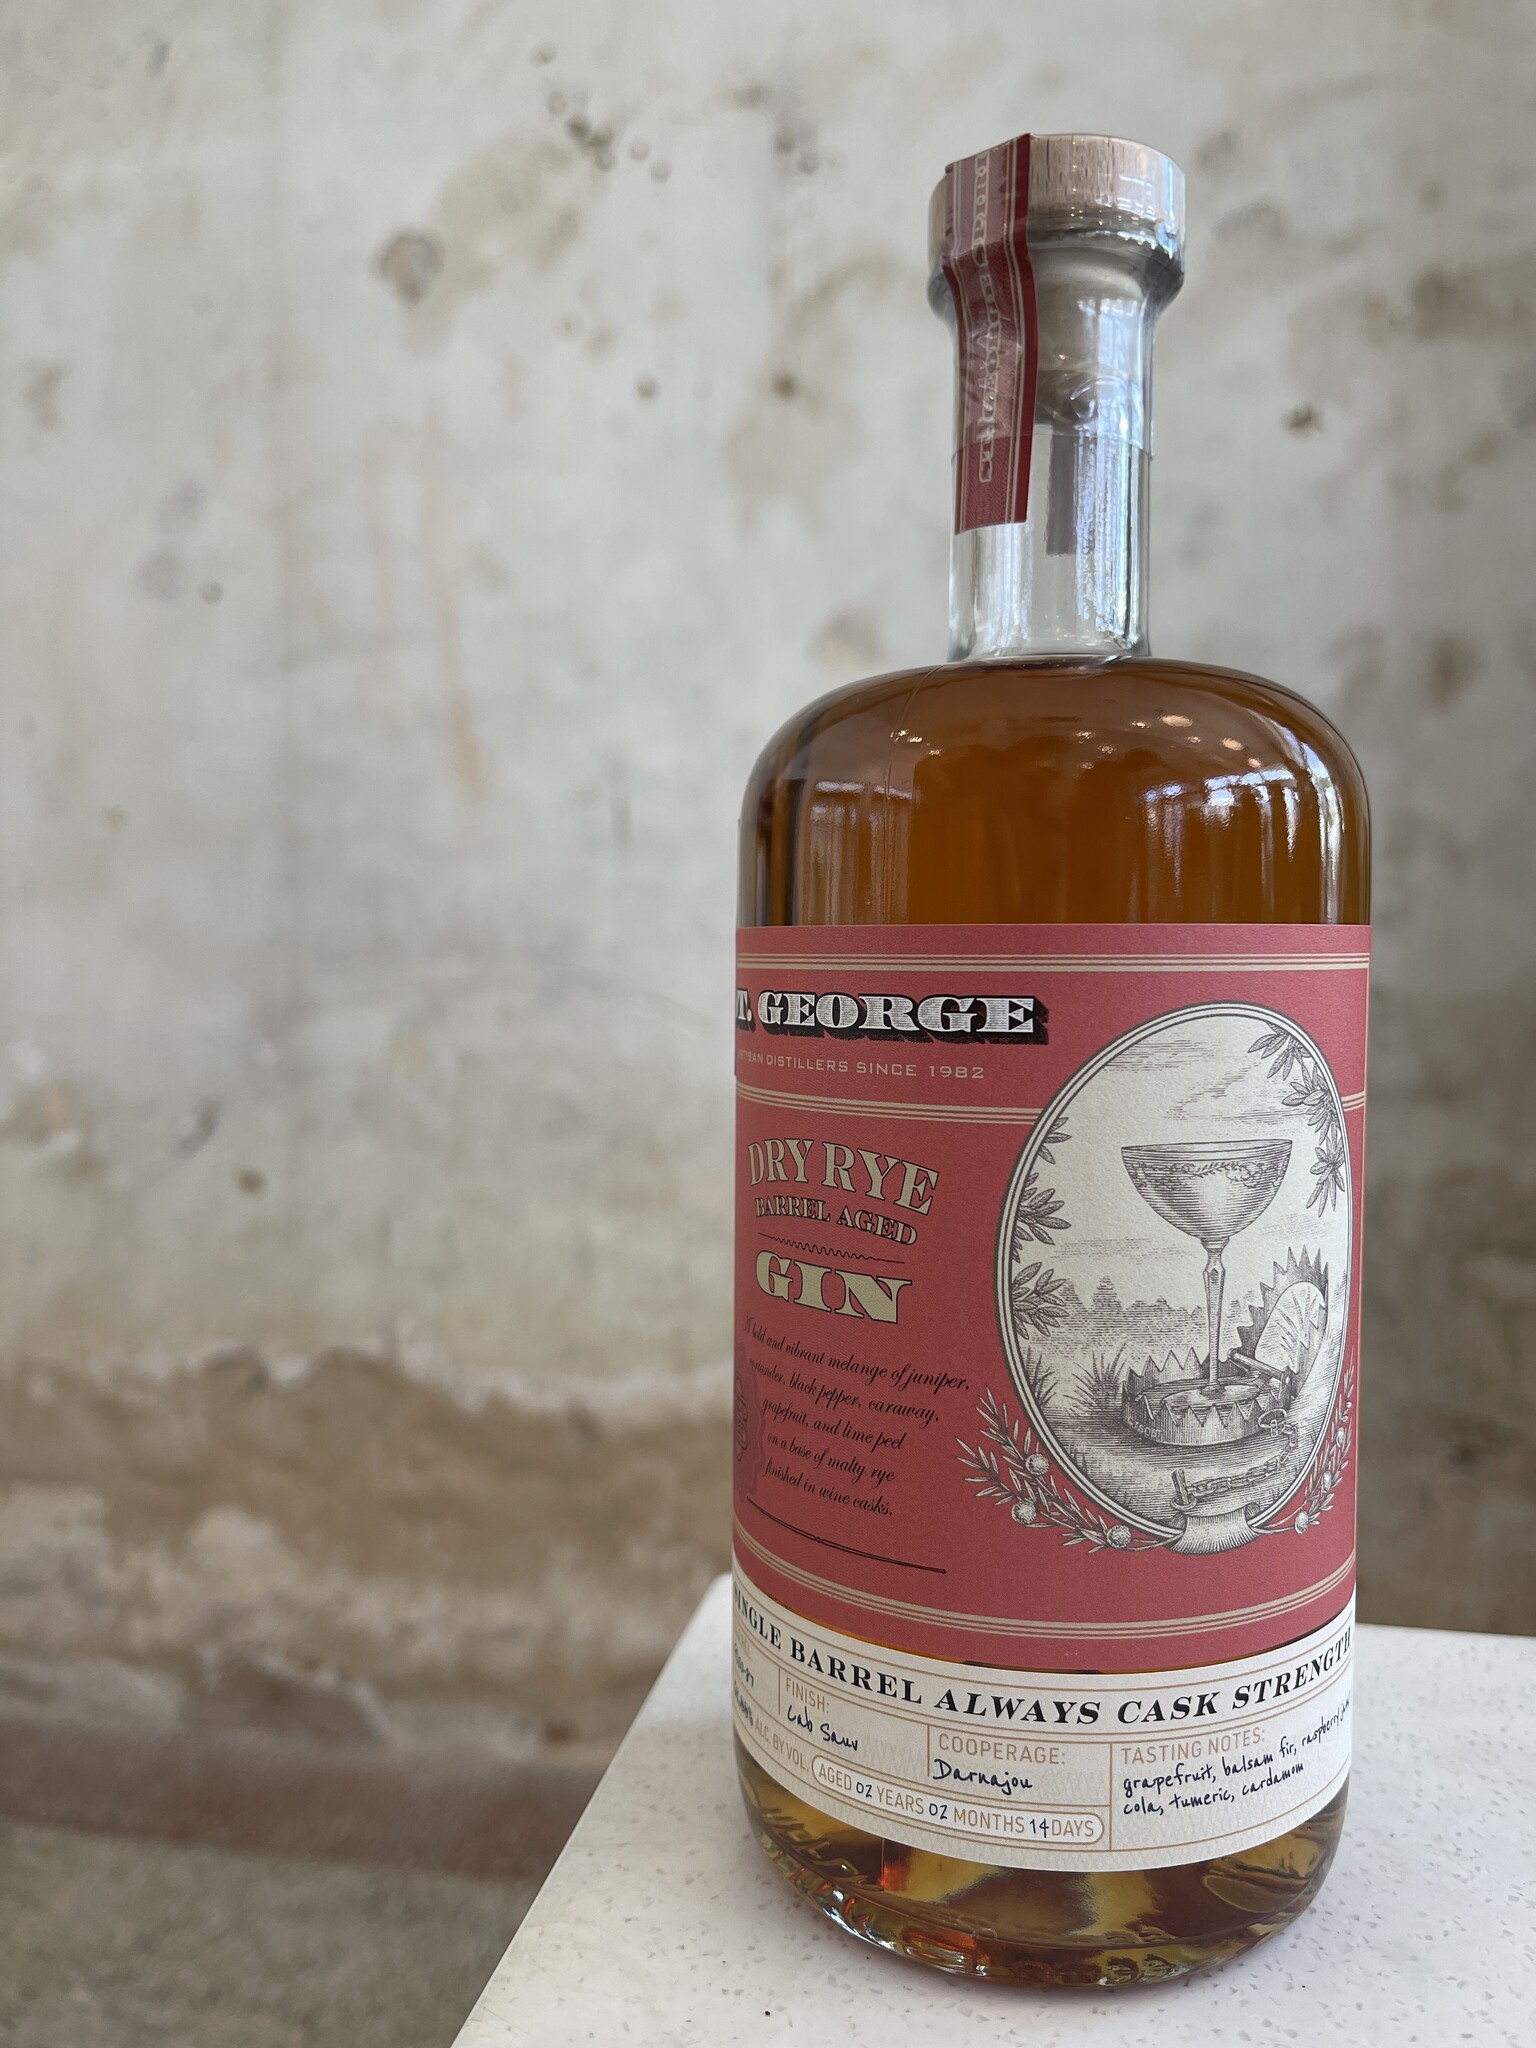 St. George St. George Dry Rye Reposado Gin Single Cask Cabernet Finish **Elemental Spirits Co. Exclusive**